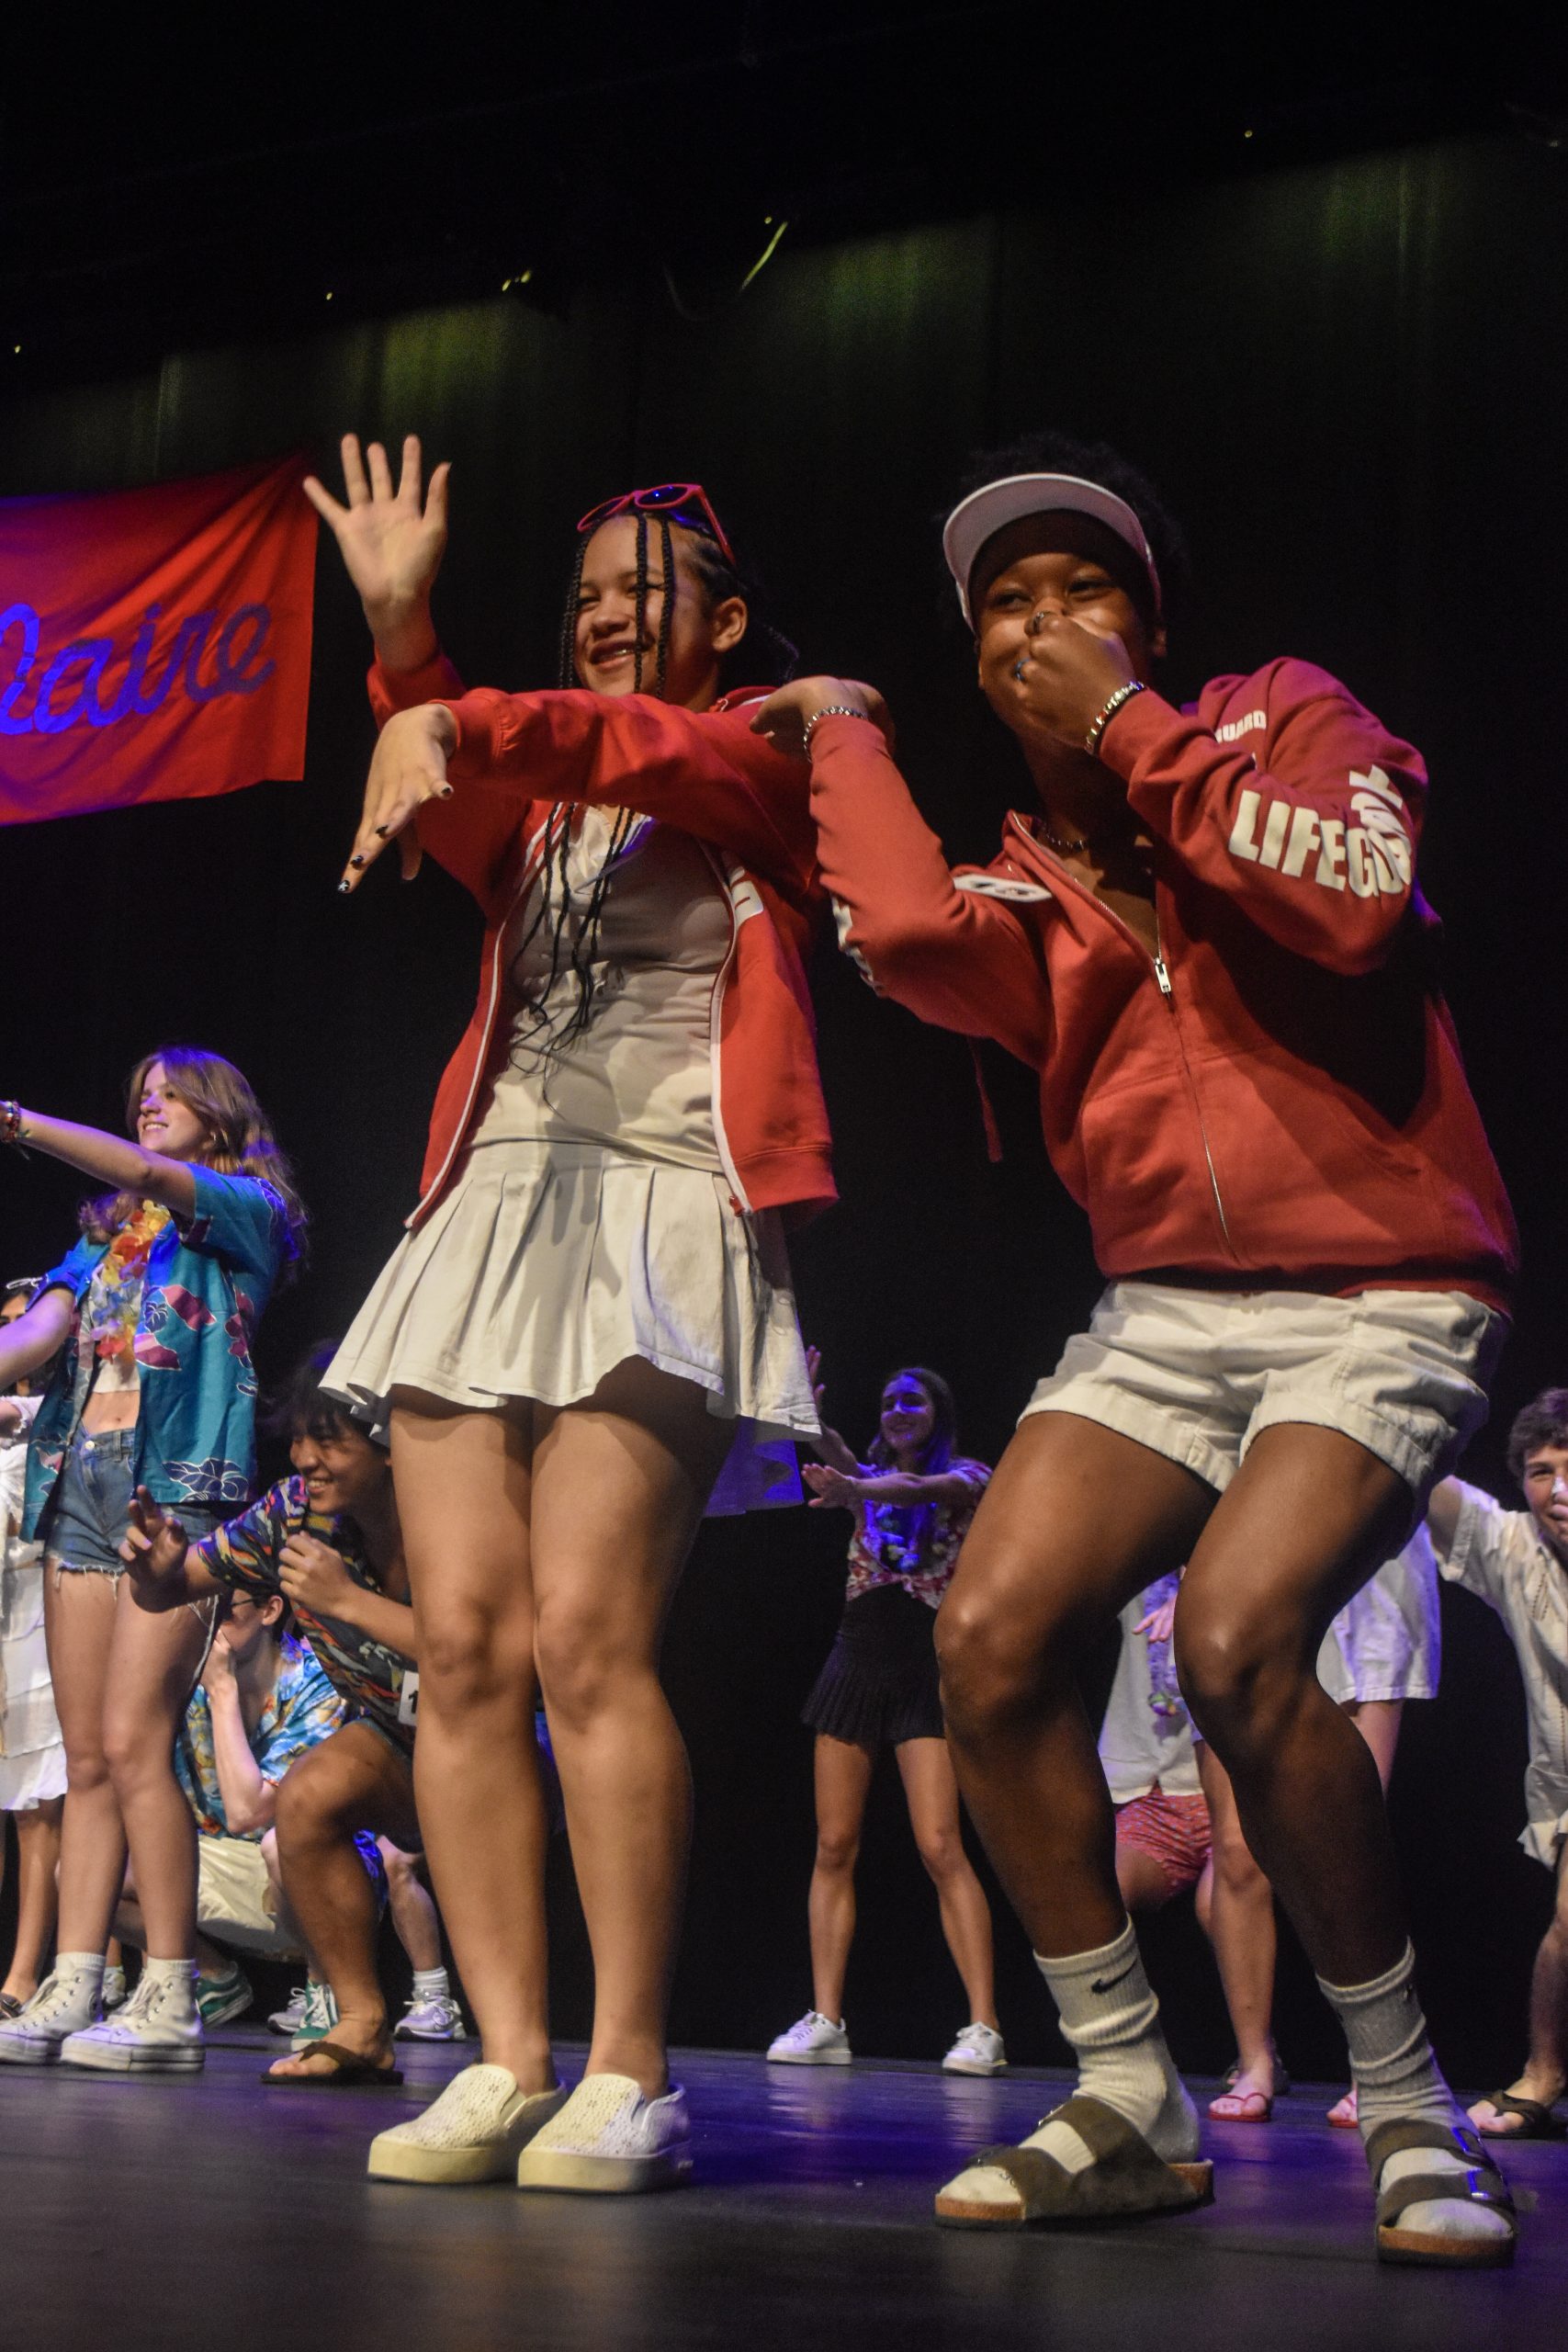 Seniors Zachary Johnson and his escort, Isabel Ajatta, perform a group dance while dressed in beachwear. Johnson was later crowned winner of the 10th annual Mr. Bellaire pageant.